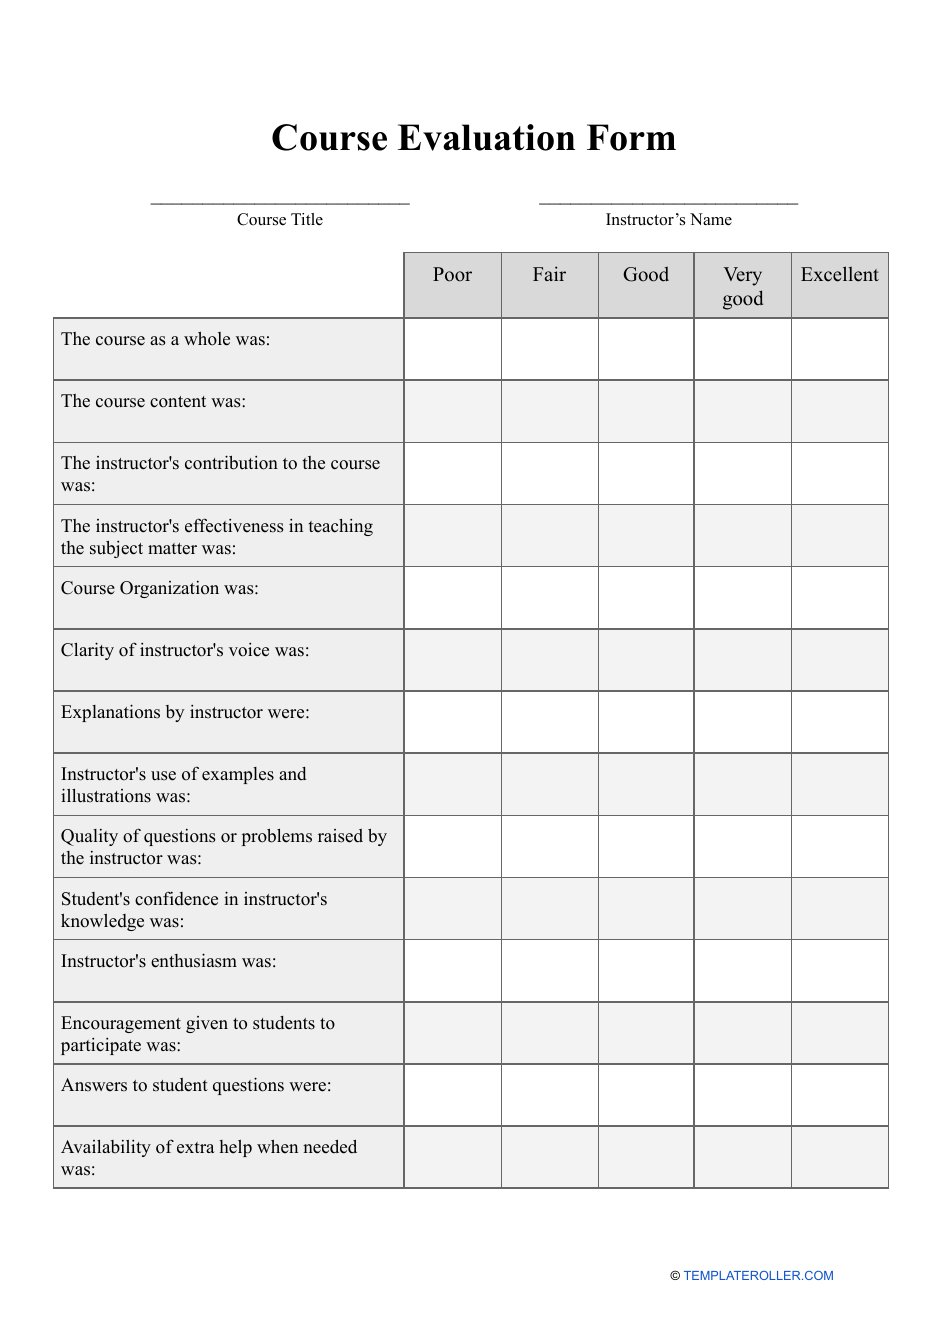 Course Evaluation Form - Big Table, Page 1